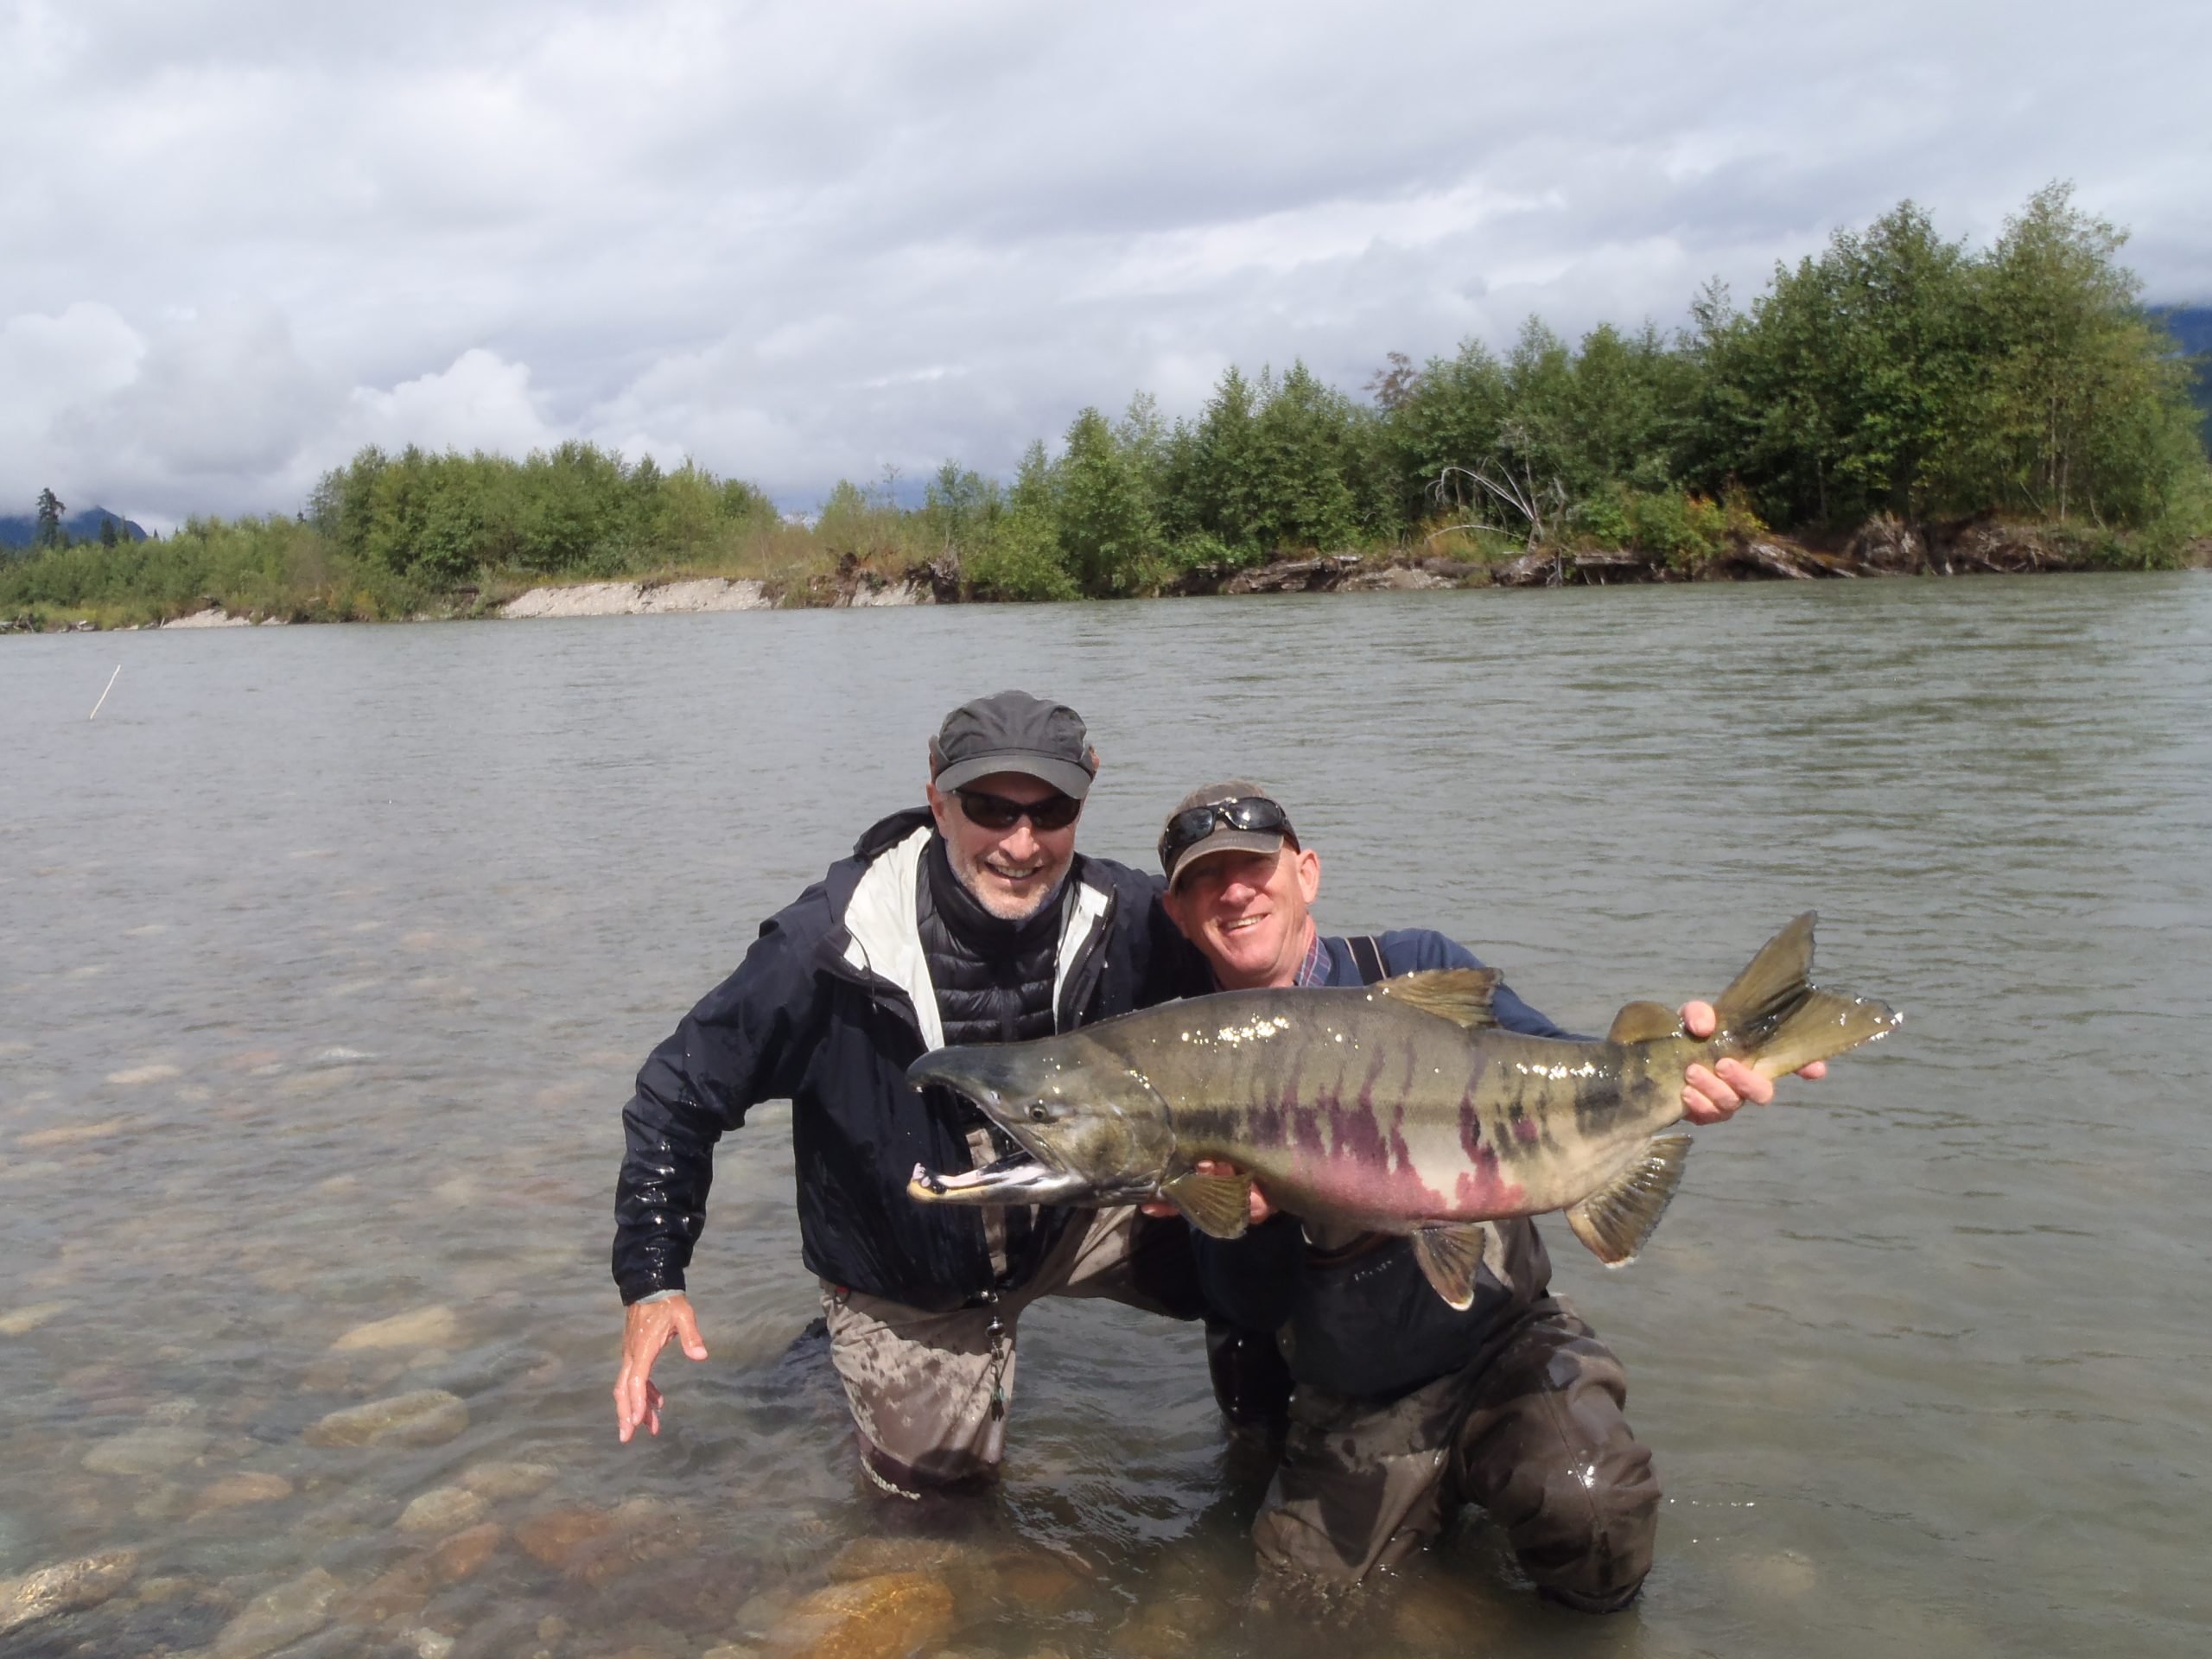 Steelhead John and owner / head guide Andrew with a big fat Chum salmon, fly fishing Canada